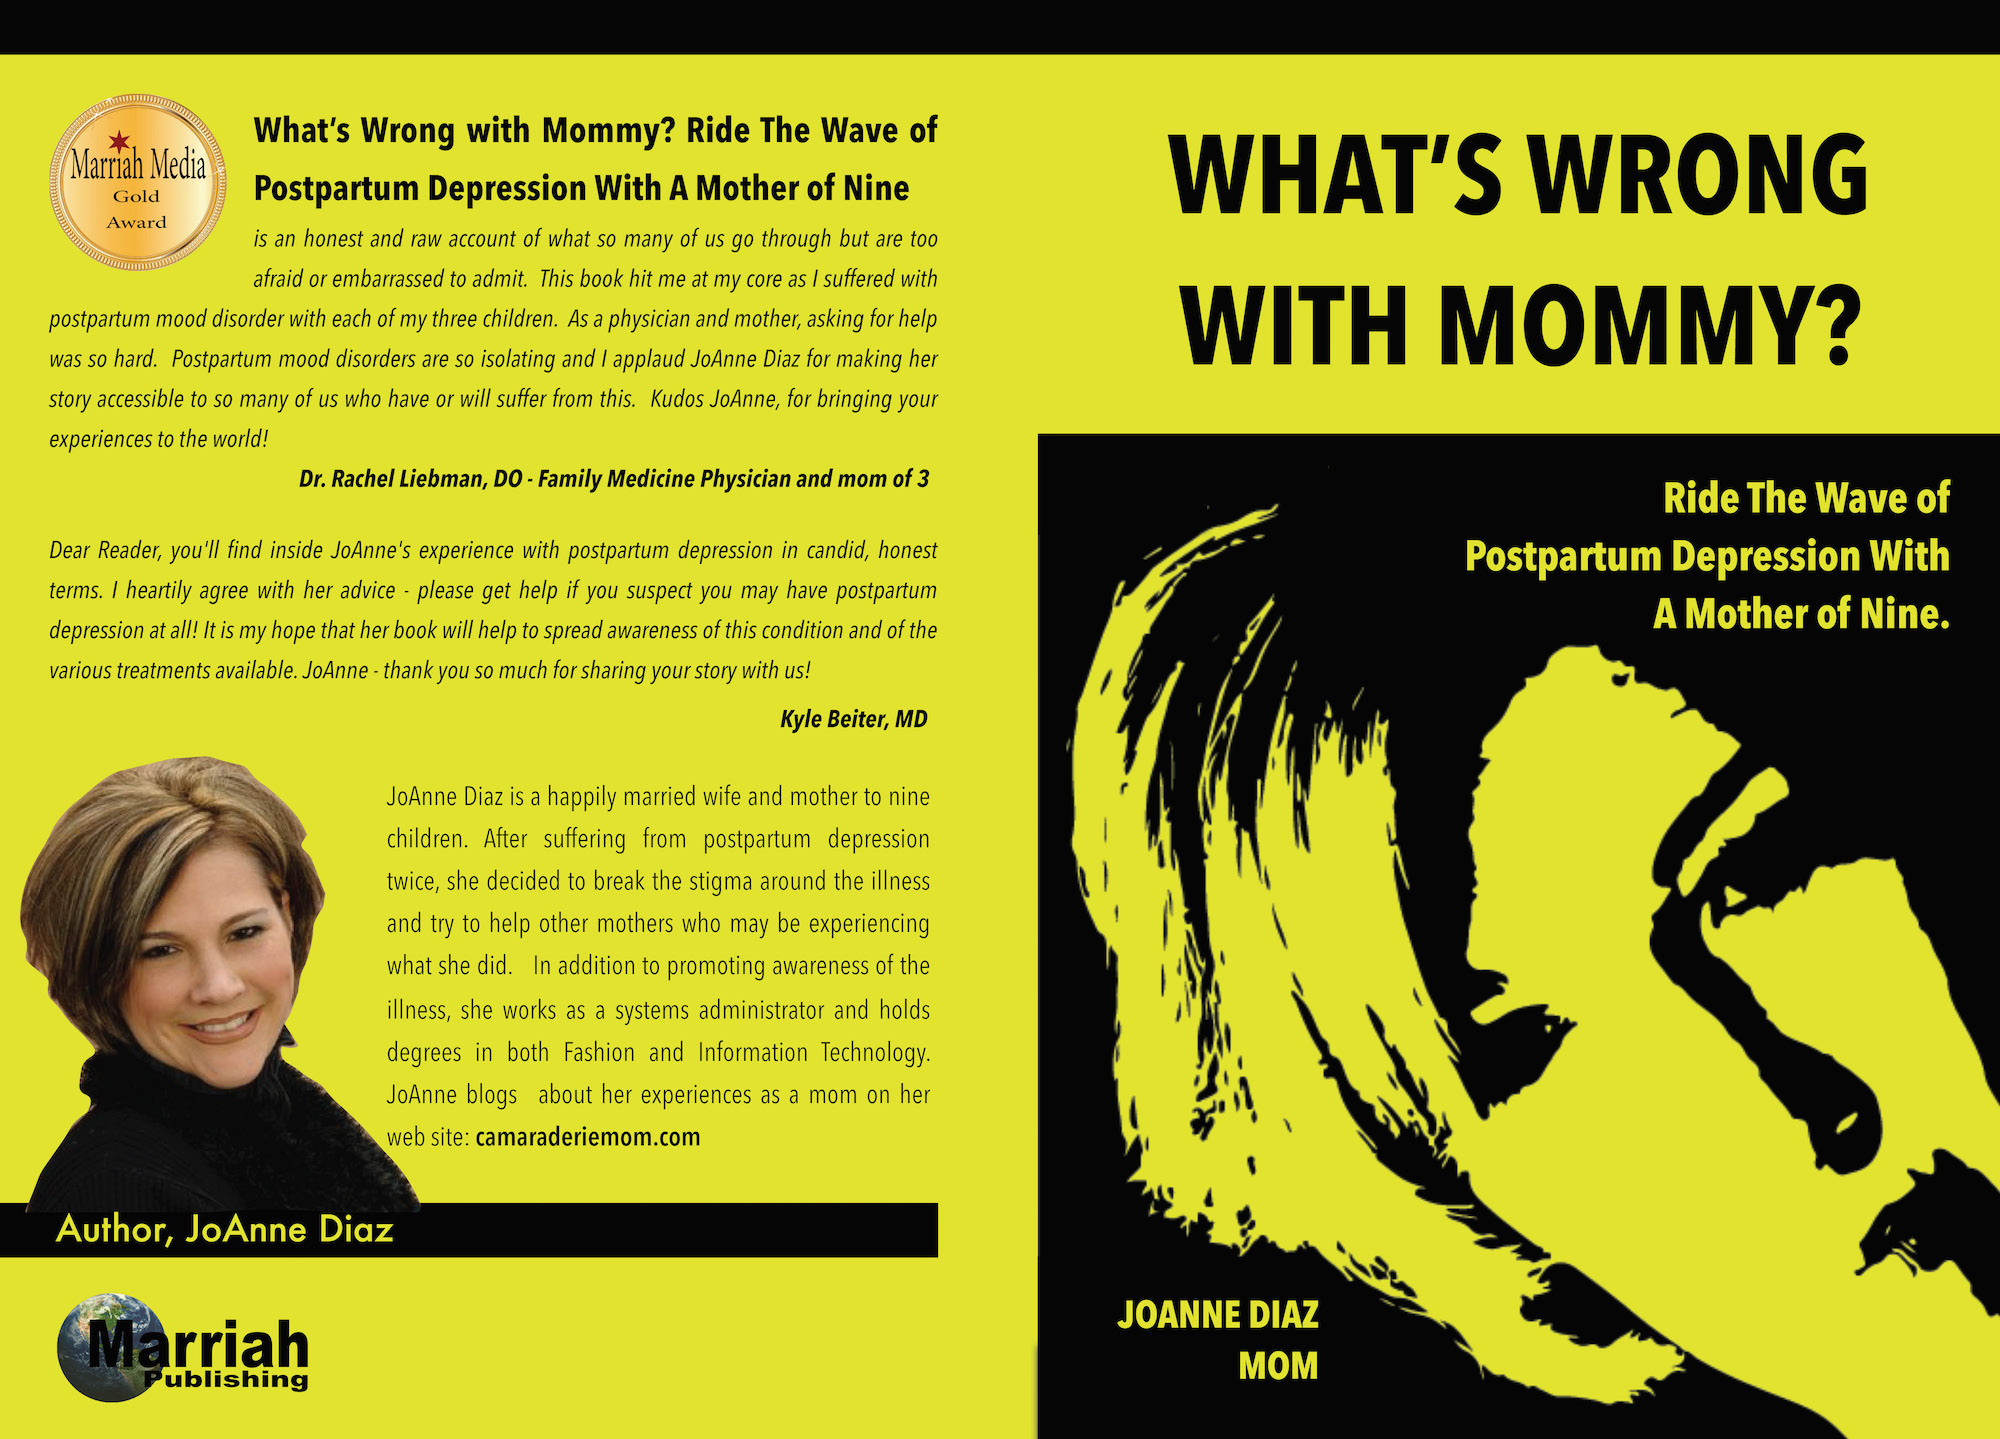 New Book Whats Wrong With Mommy Just Released About Postpartum Depression From A Mother Of